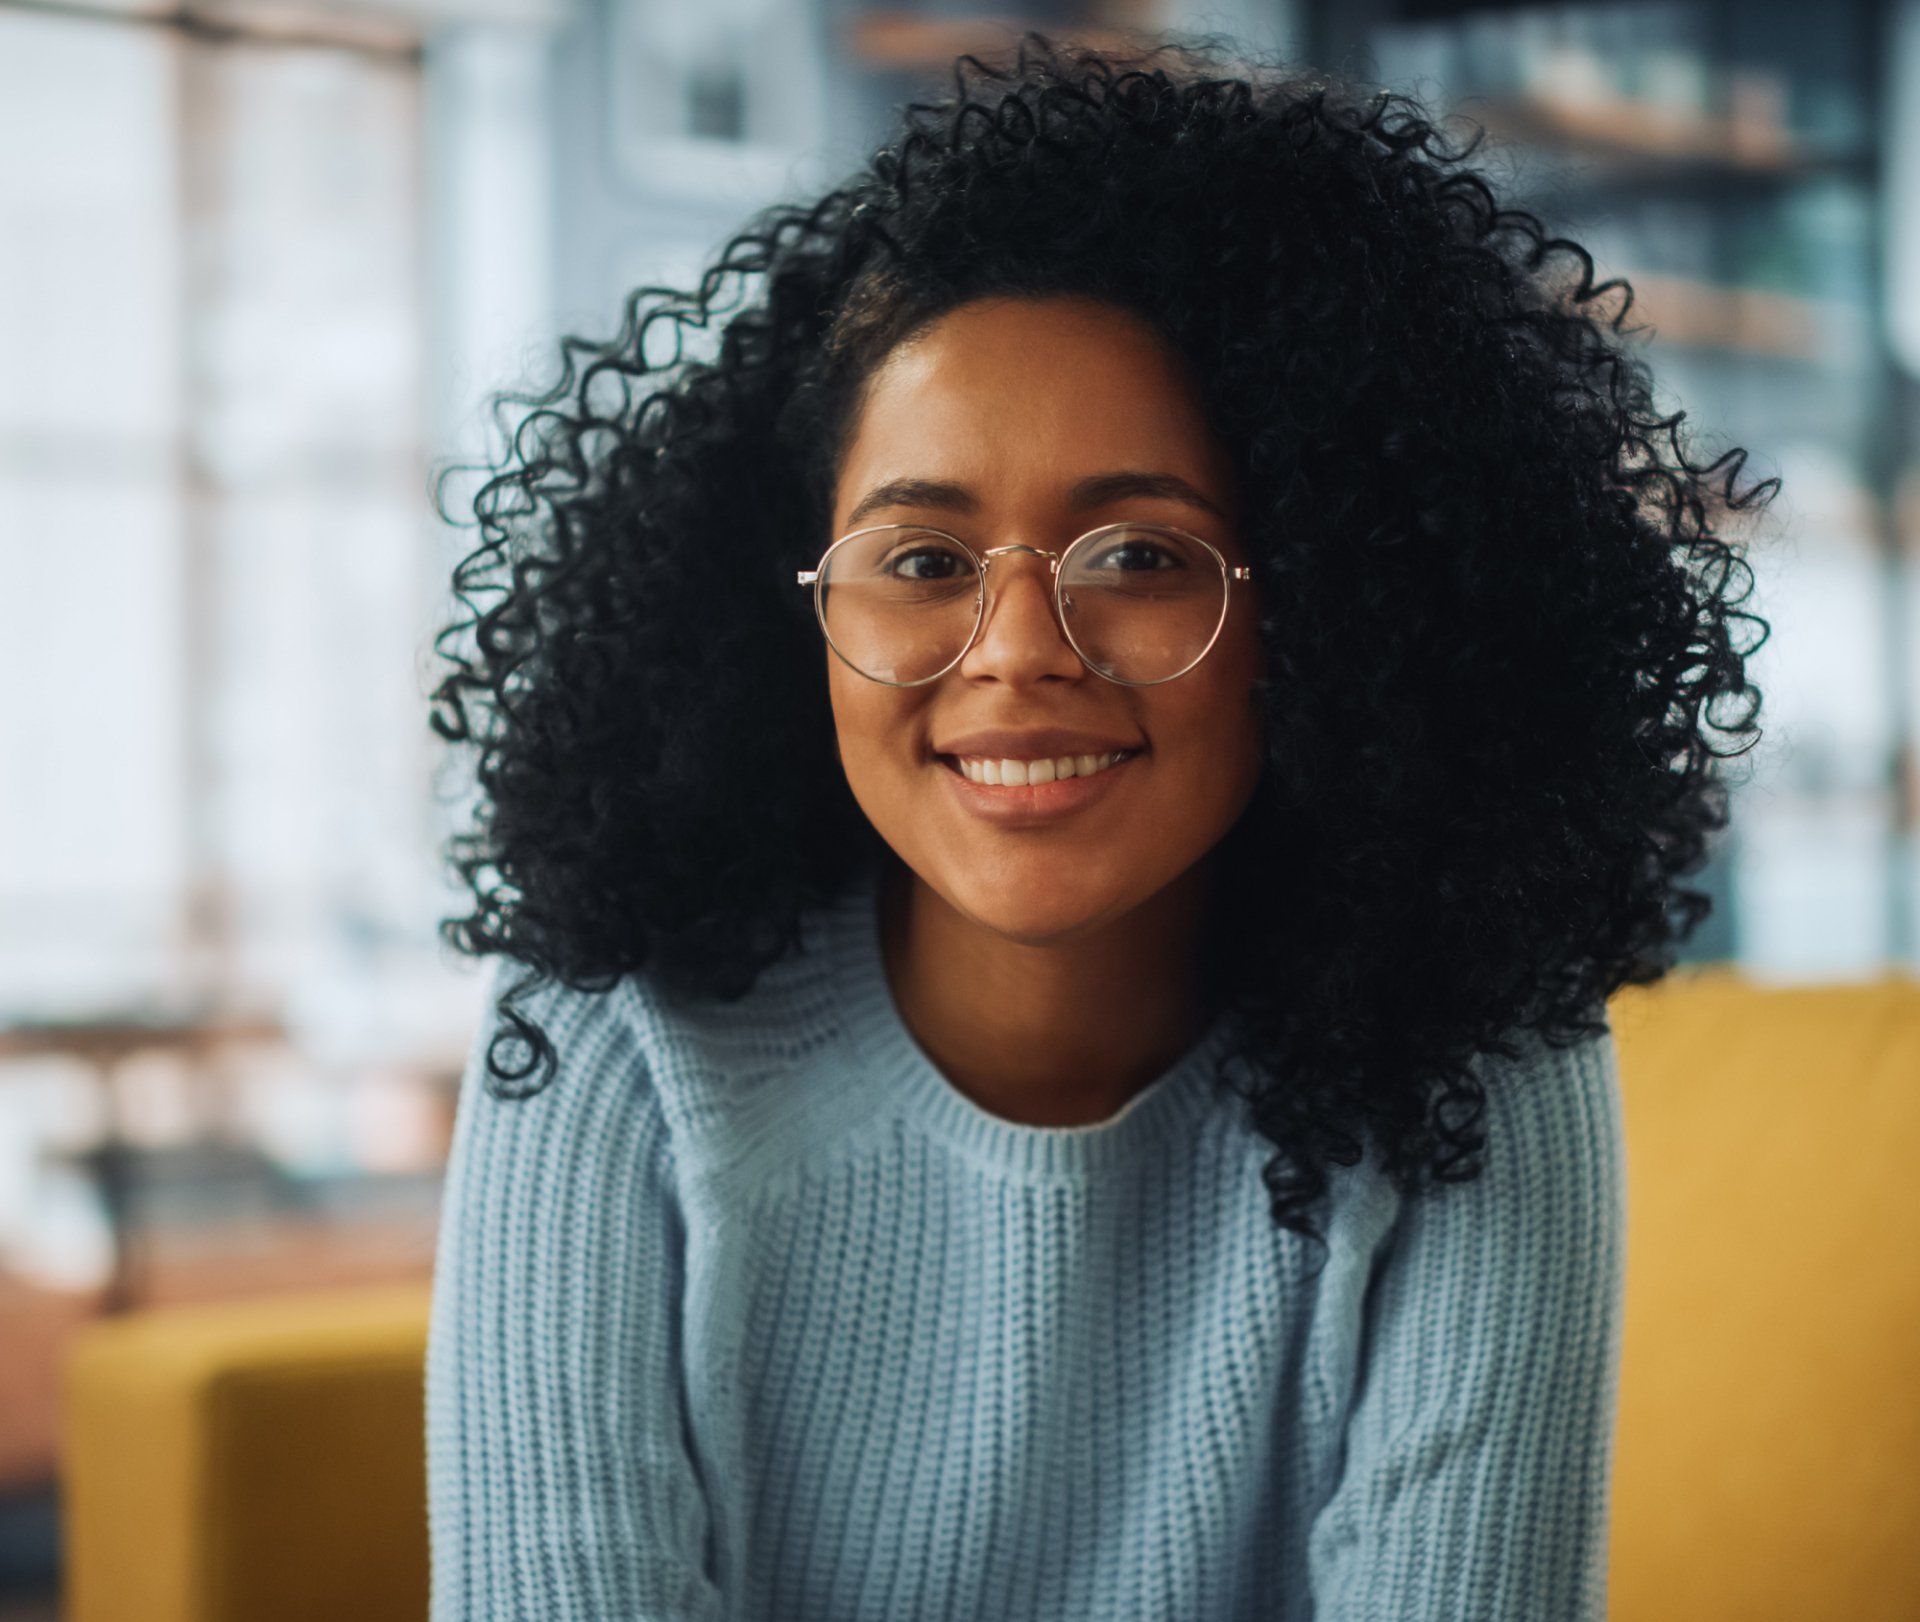 A woman with curly hair is wearing glasses and a blue sweater.